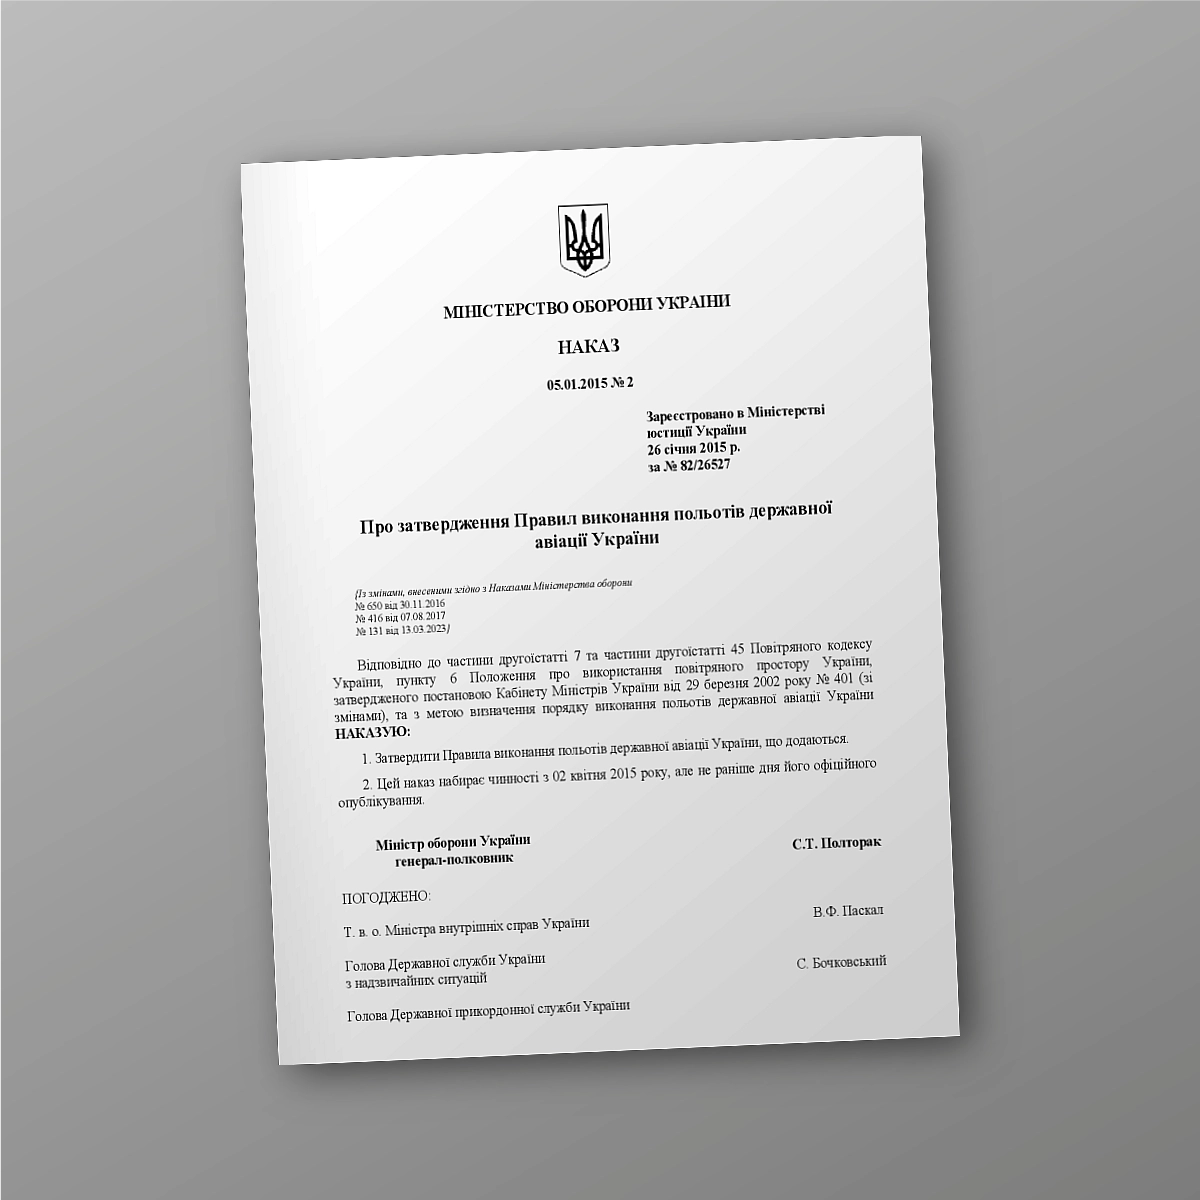 Order 2 + Appendices. On the approval of the Rules for the execution of flights of the state aviation of Ukraine | PrintTo: